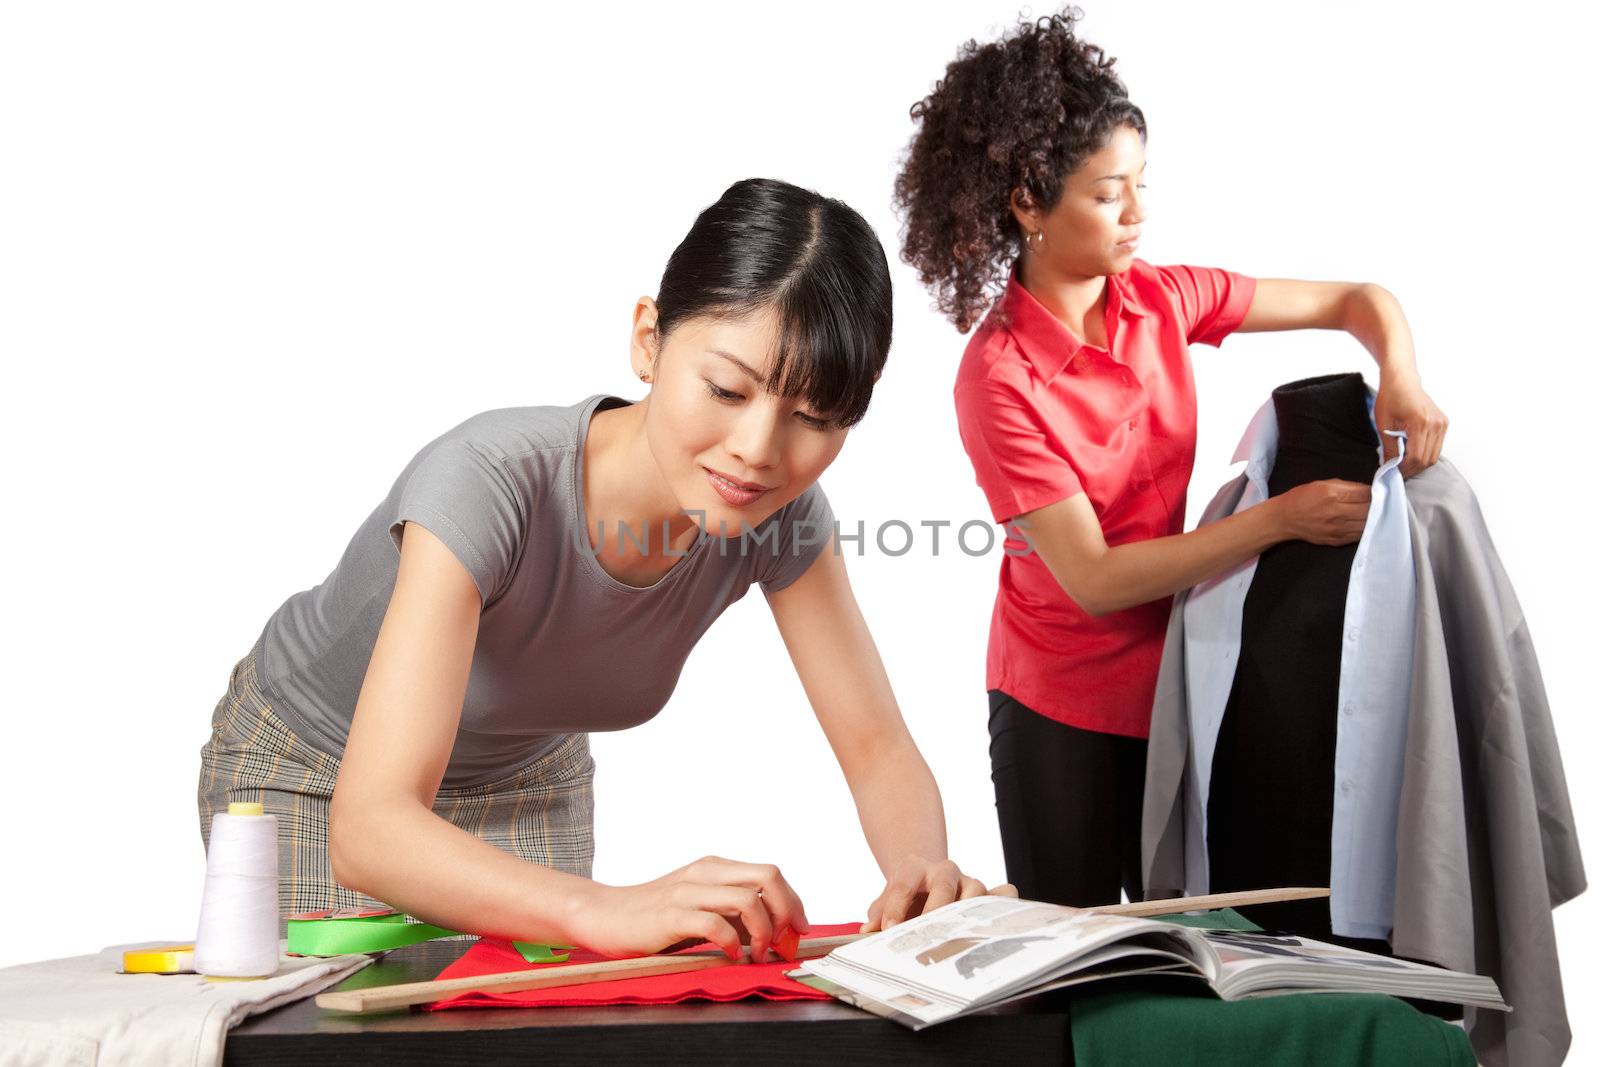 Two young woman dressmaker at work.